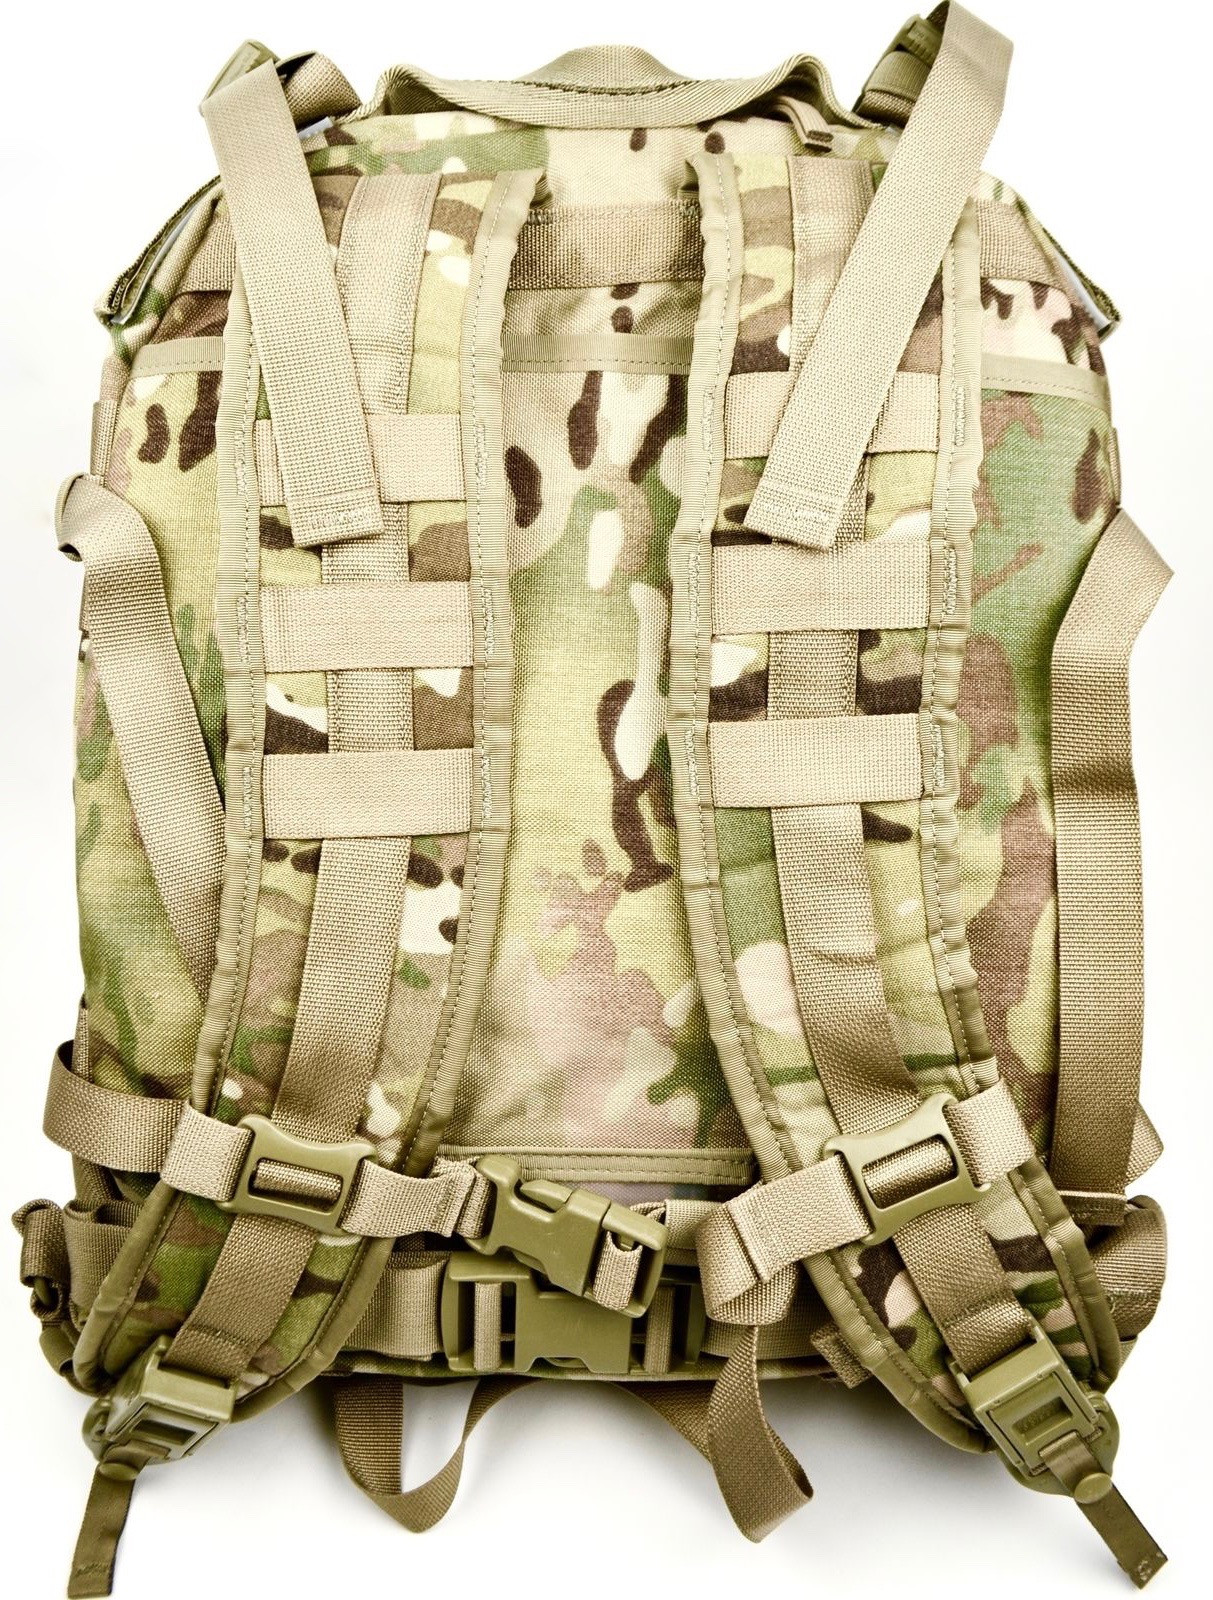 US ARMY MILITARY ISSUE 3 DAY ASSAULT PACK MULTICAM OCP w/Free Hyd Carrier